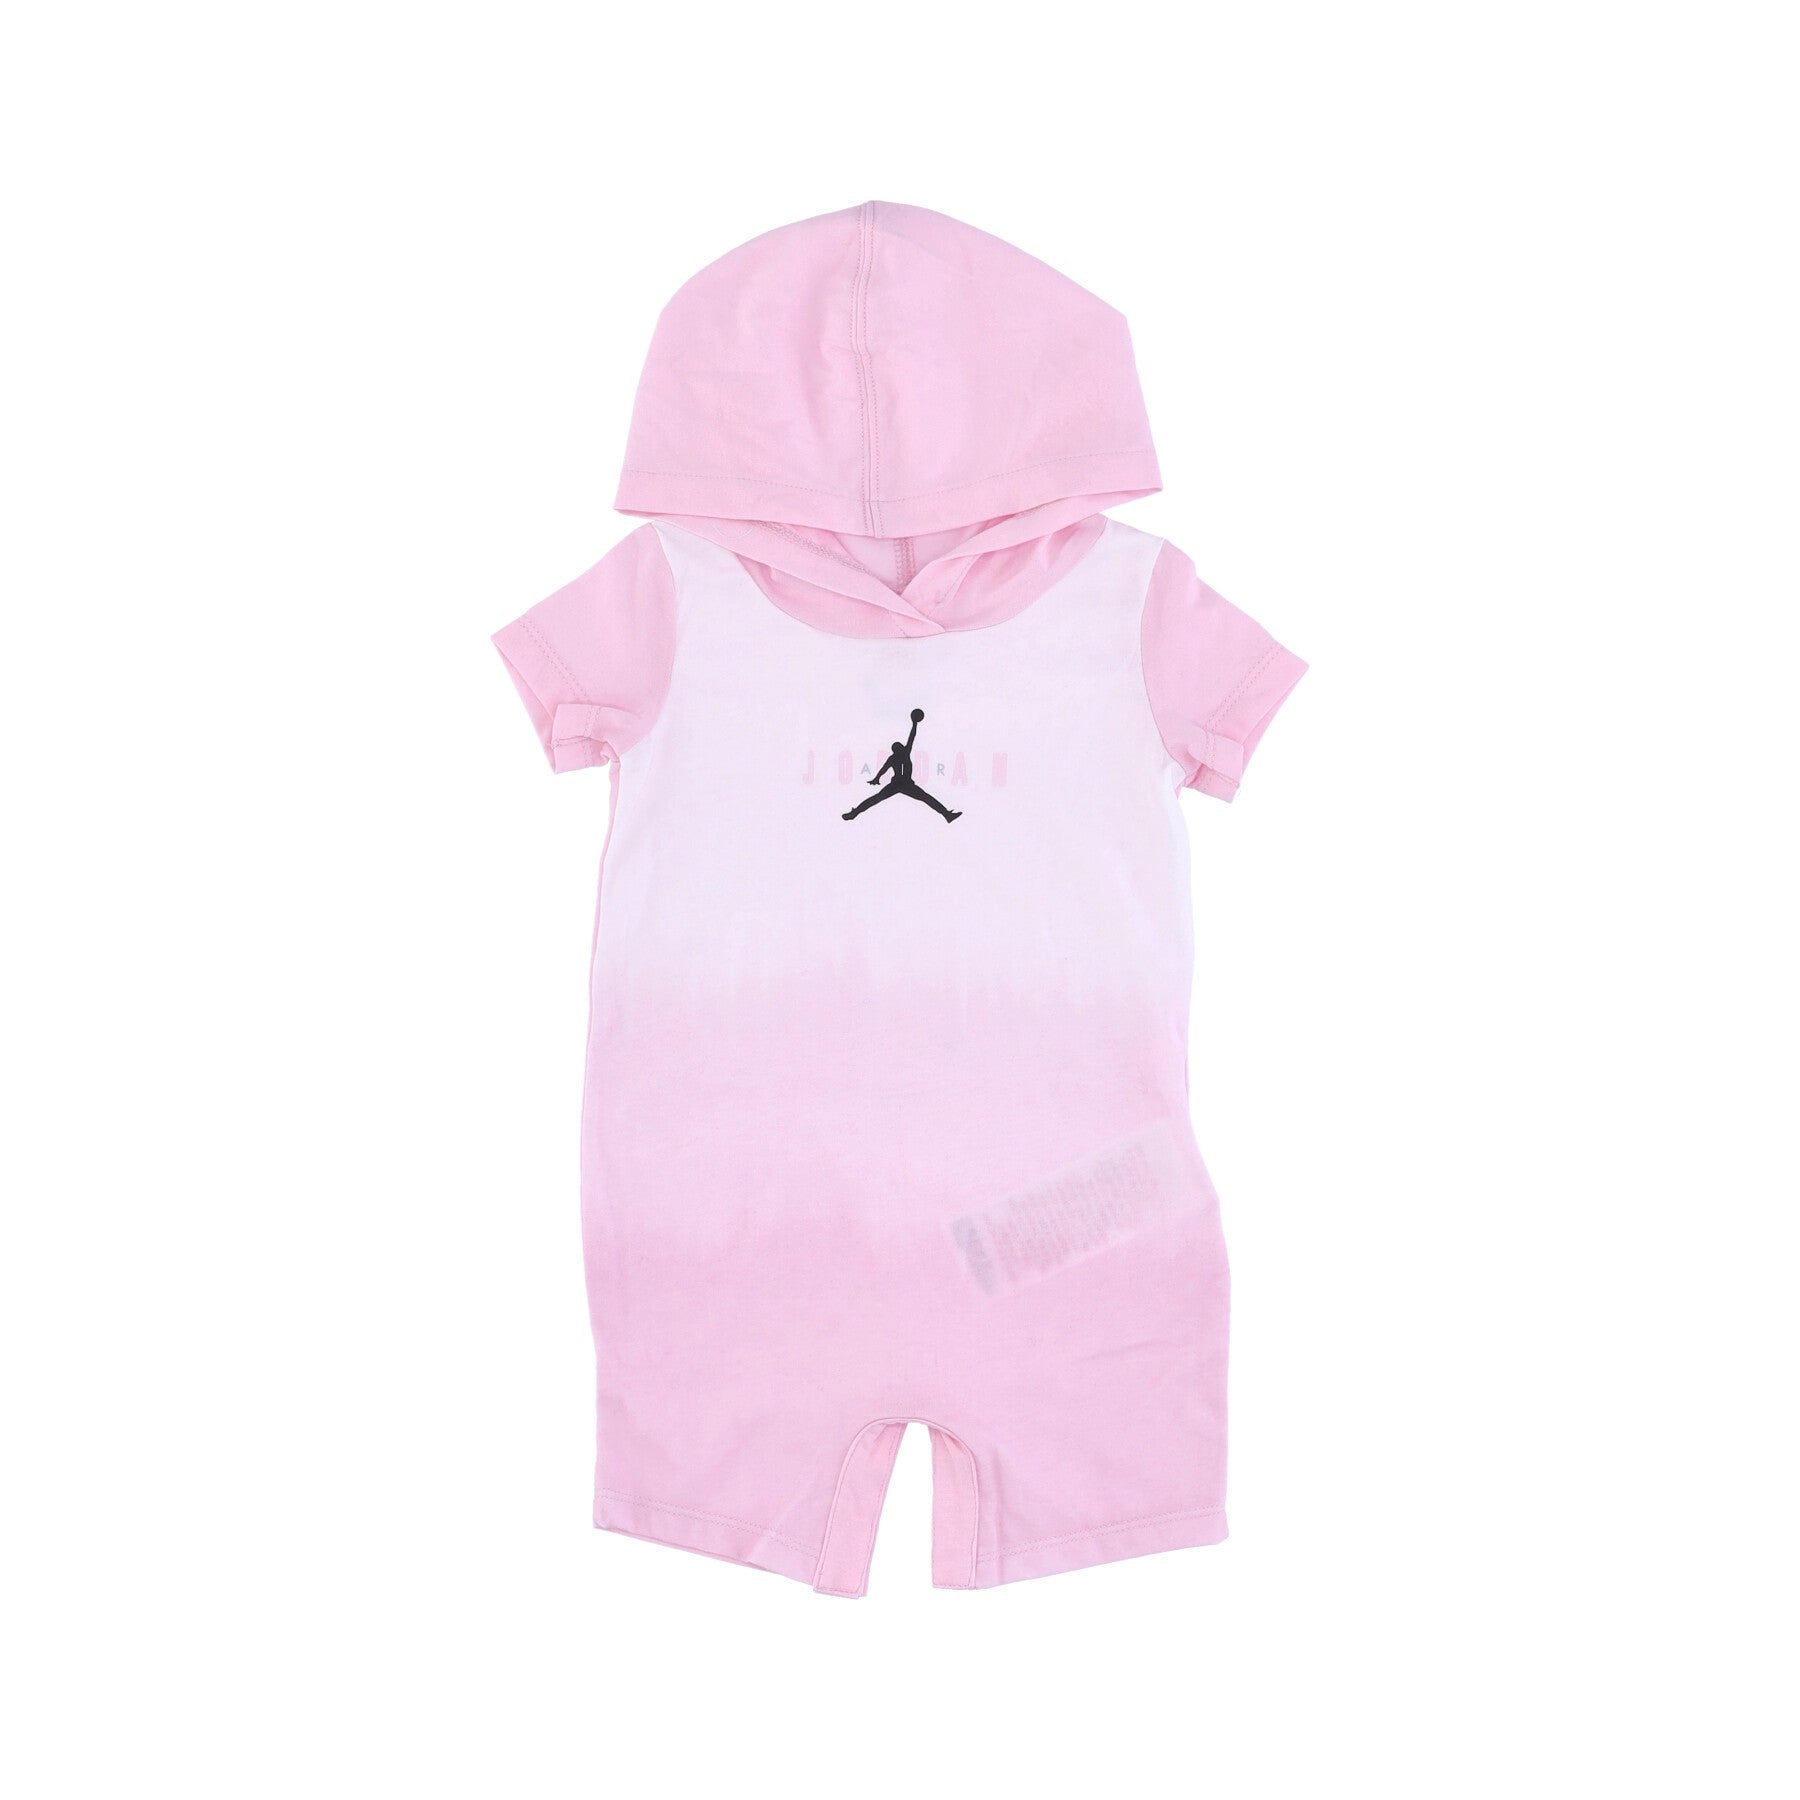 Ombre Hooded Romper Pink Foam Baby One-piece Suit